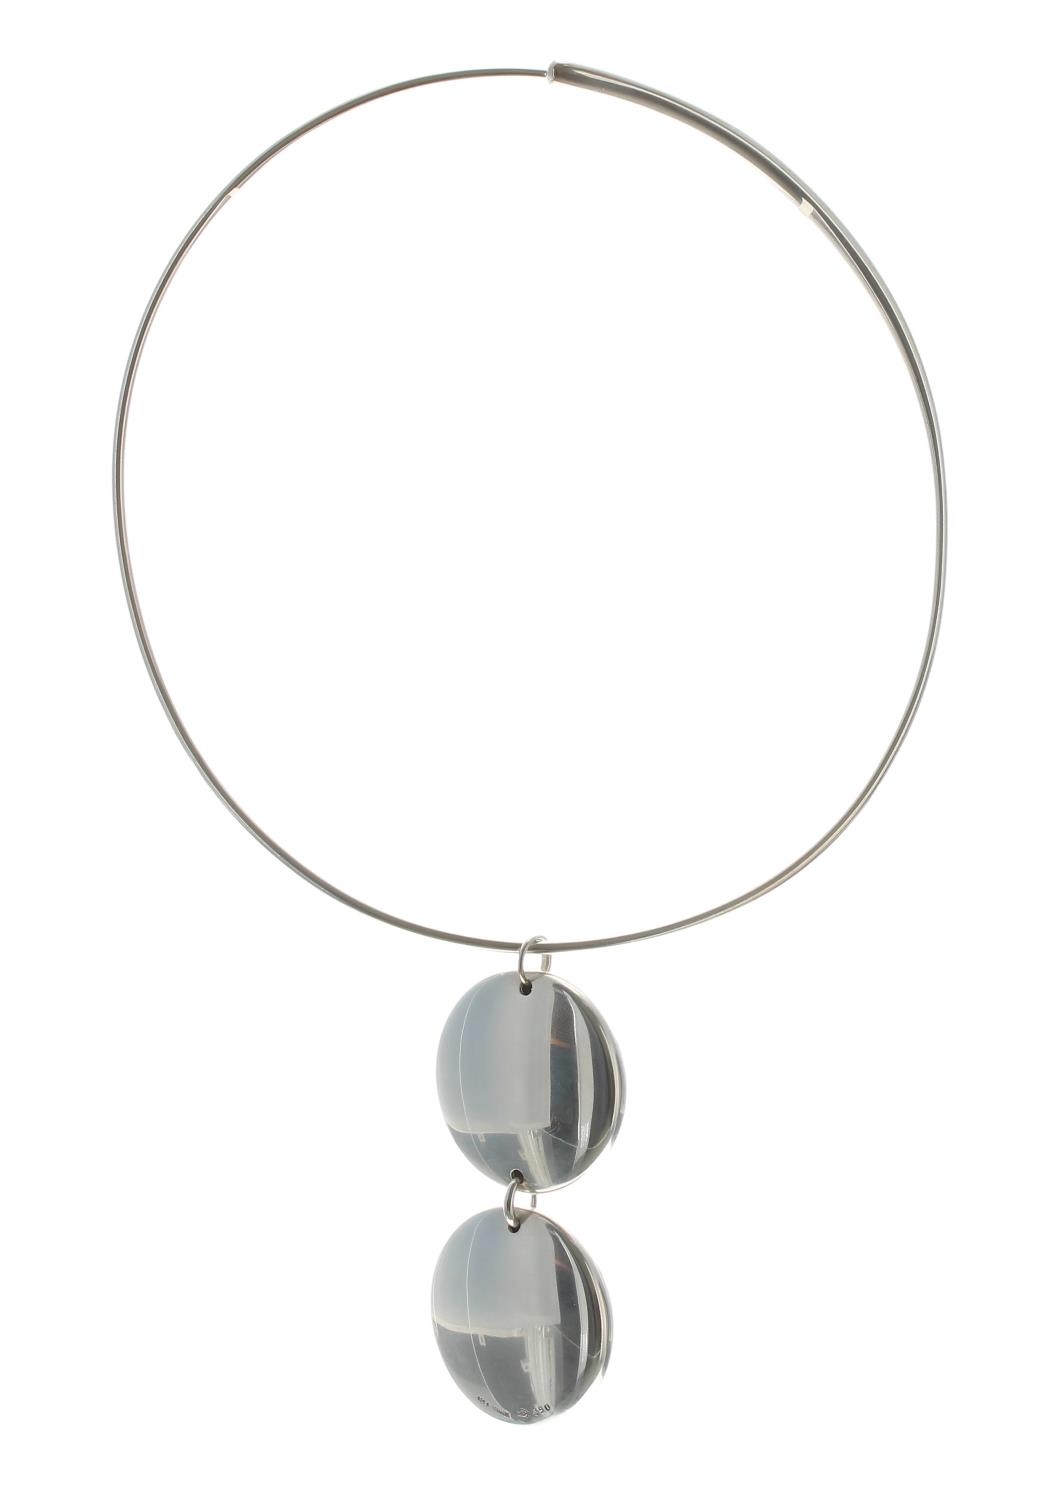 Georg Jensen 'Zero' silver necklace designed by Jacqueline Rabun, no. 450, signed ** with the - Image 2 of 5